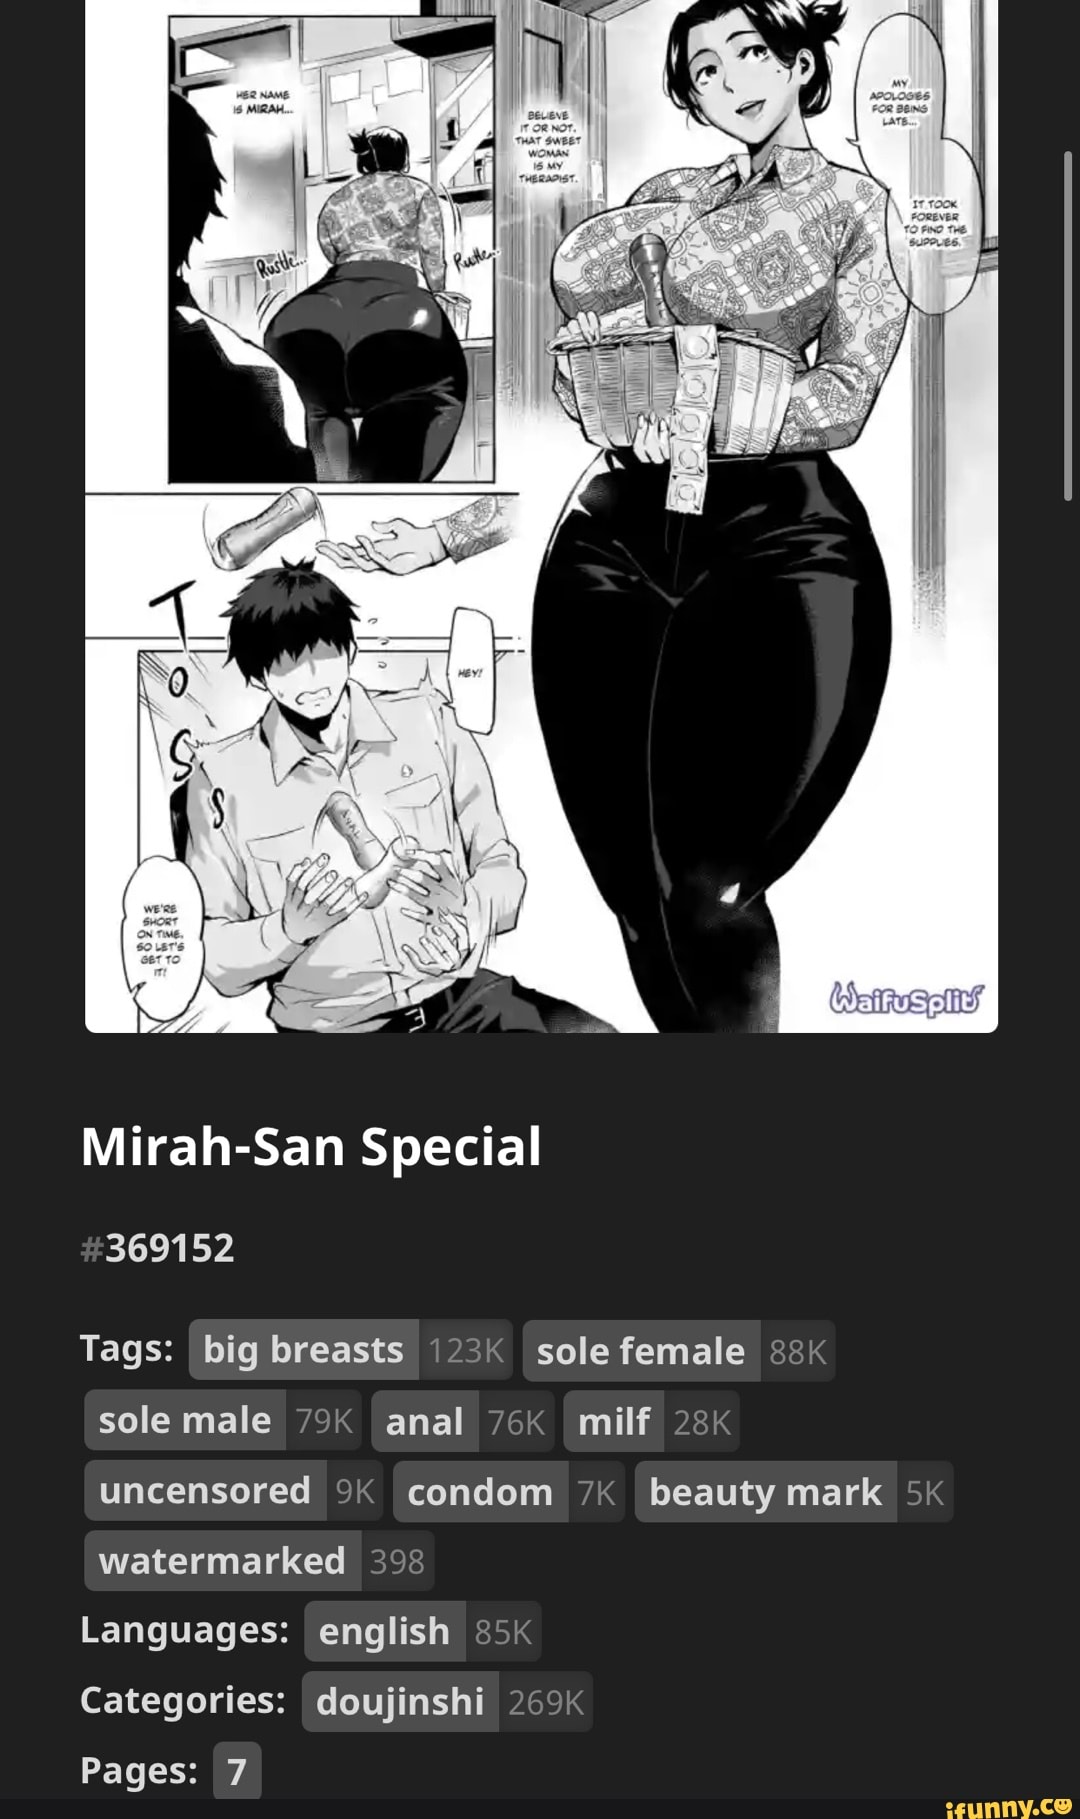 Mirah-San Special 369152 Tags: I big breasts 123K sole female sole male  anal milf uncensored condom beauty mark watermarked 398 Languages: english  Categories: doujinshi 269K Pages: 7 - iFunny